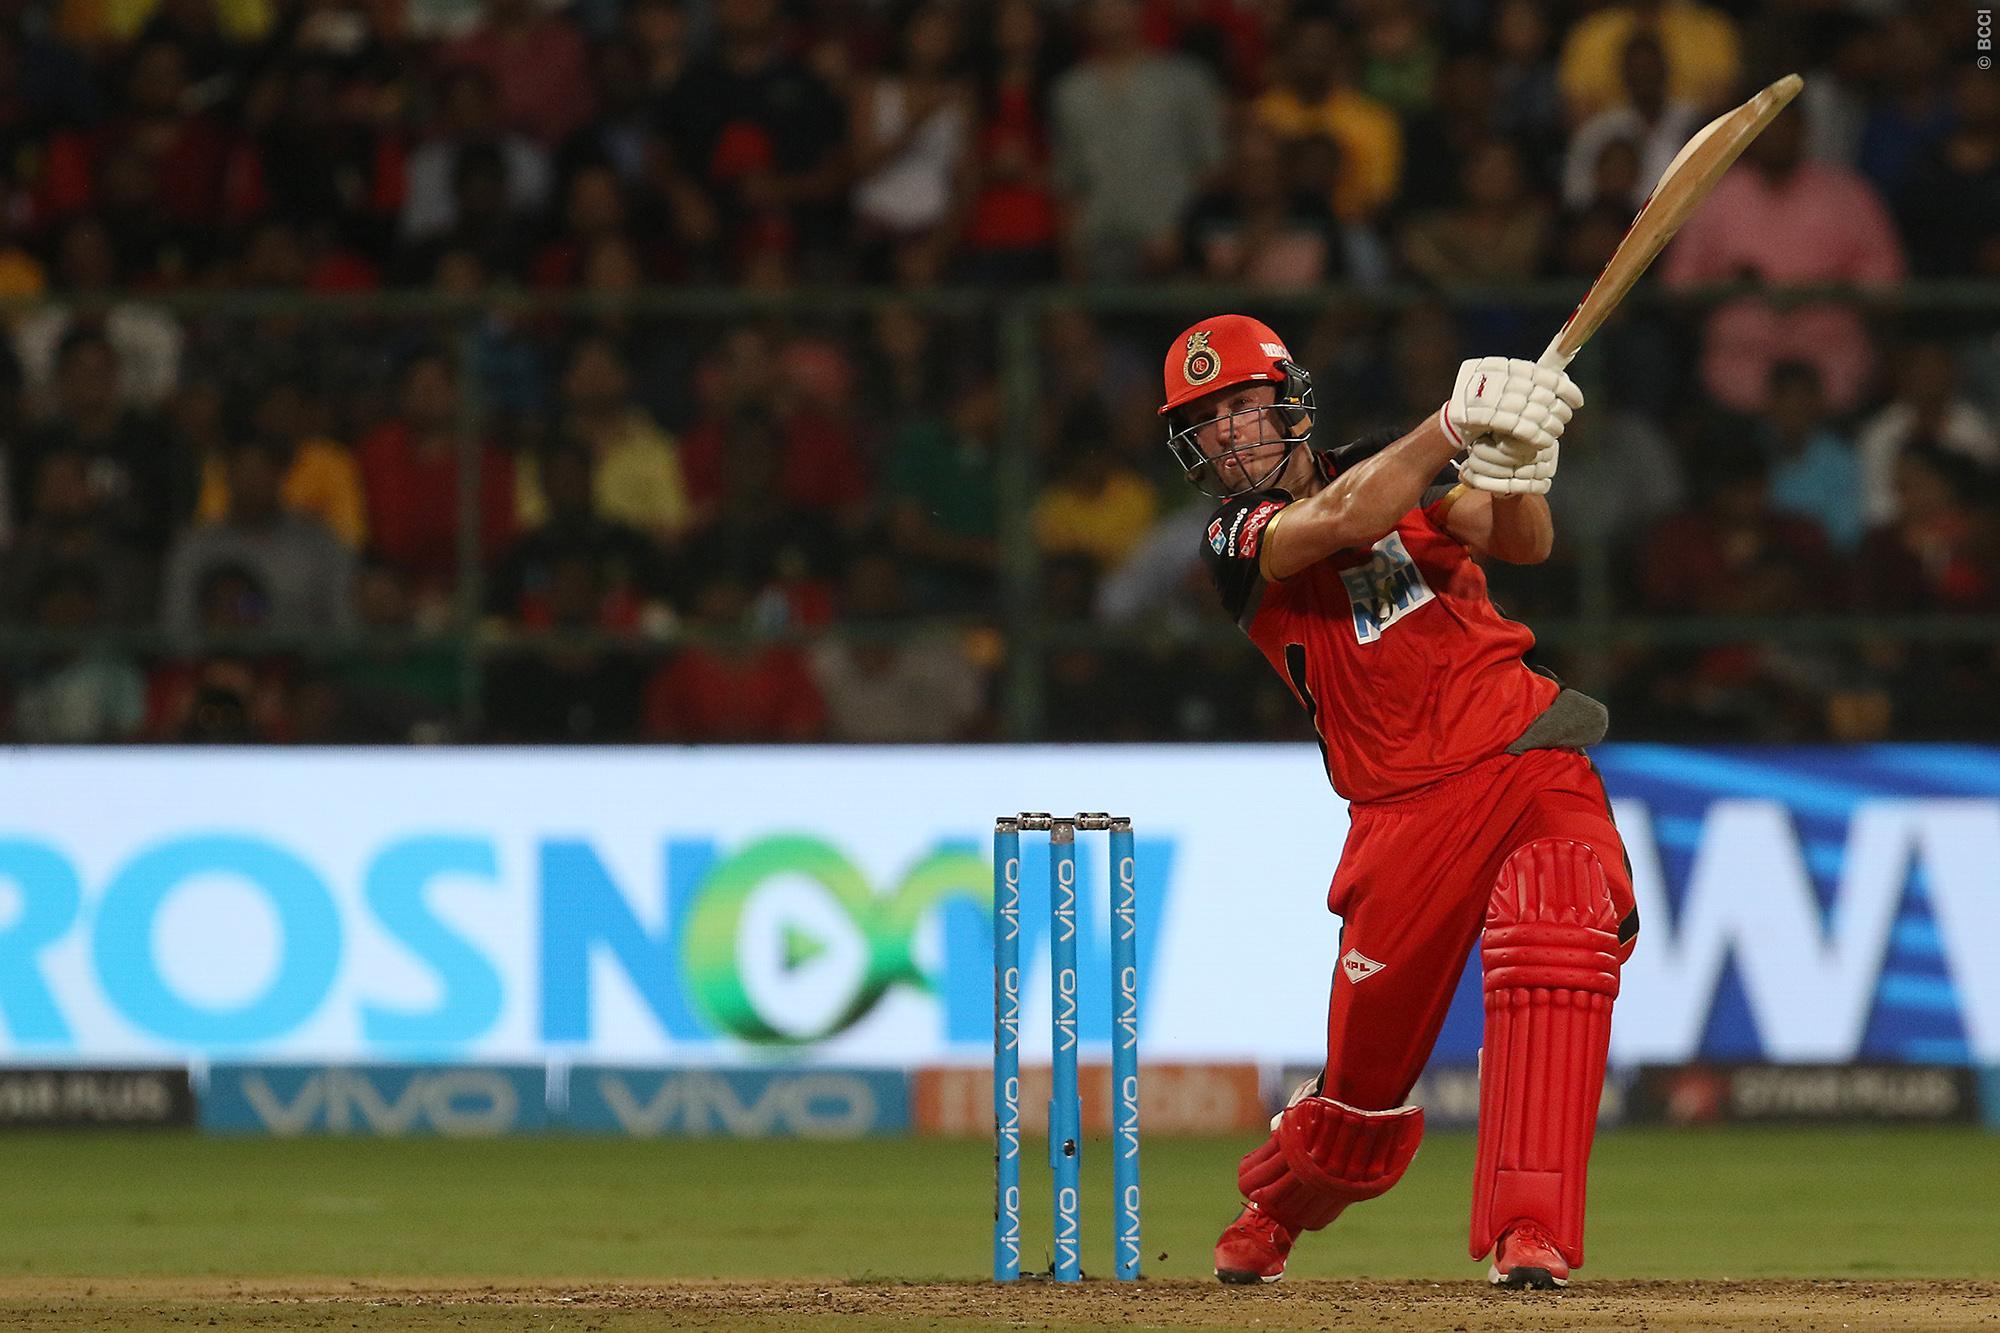 RCB not far from best performance, says AB de Villiers ahead of the game versus CSK